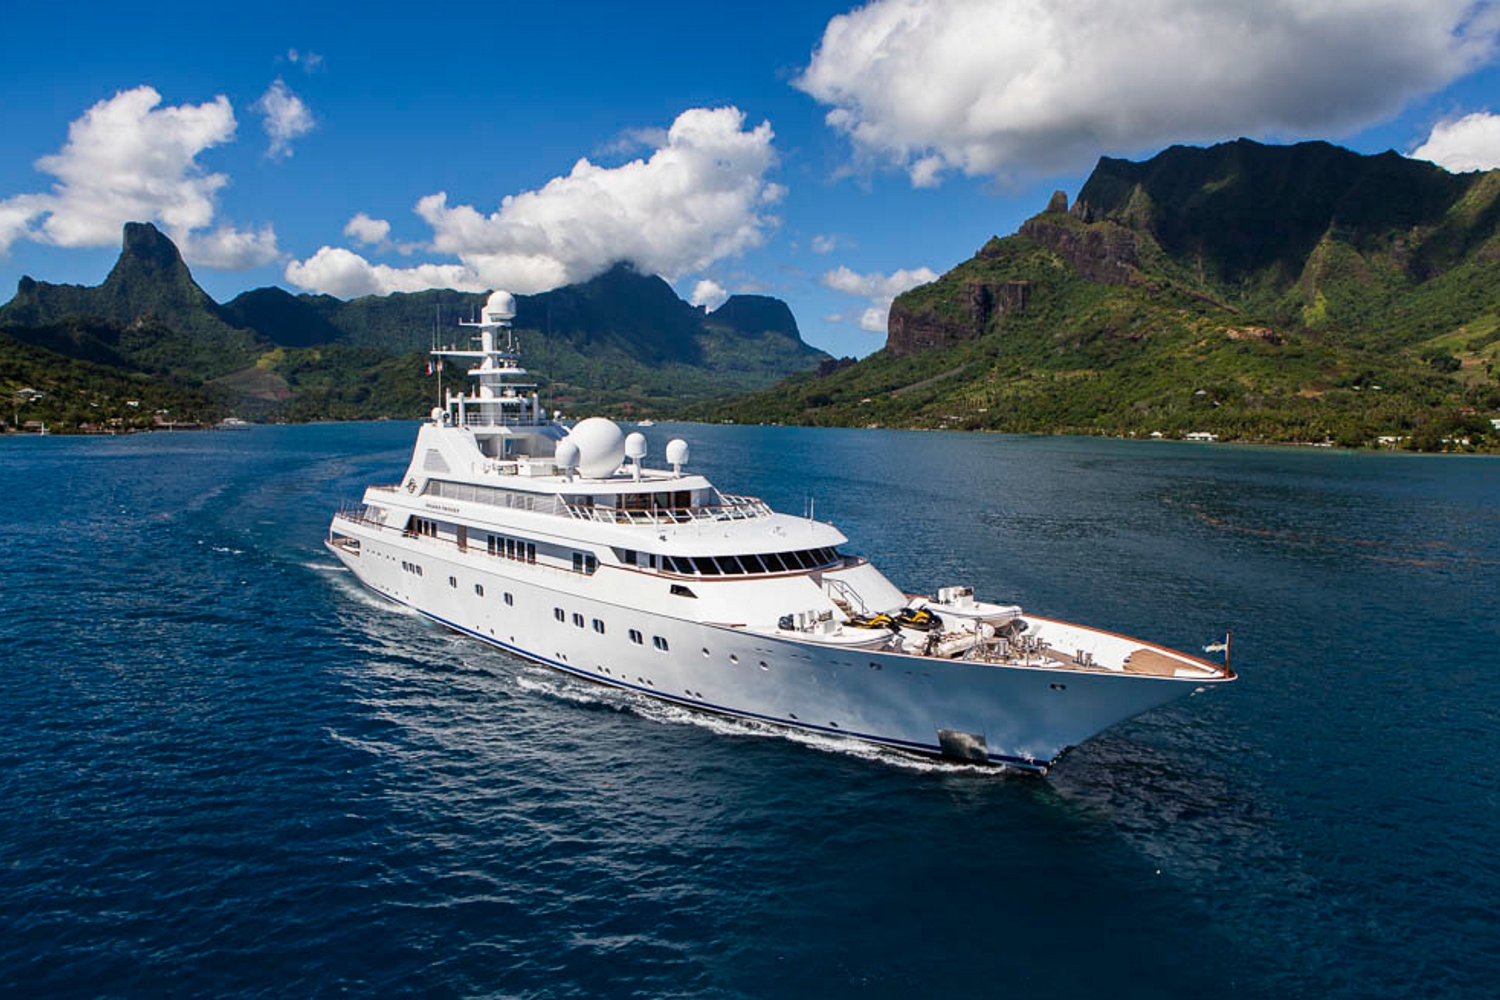 Grand Ocean cruising in the South Pacific